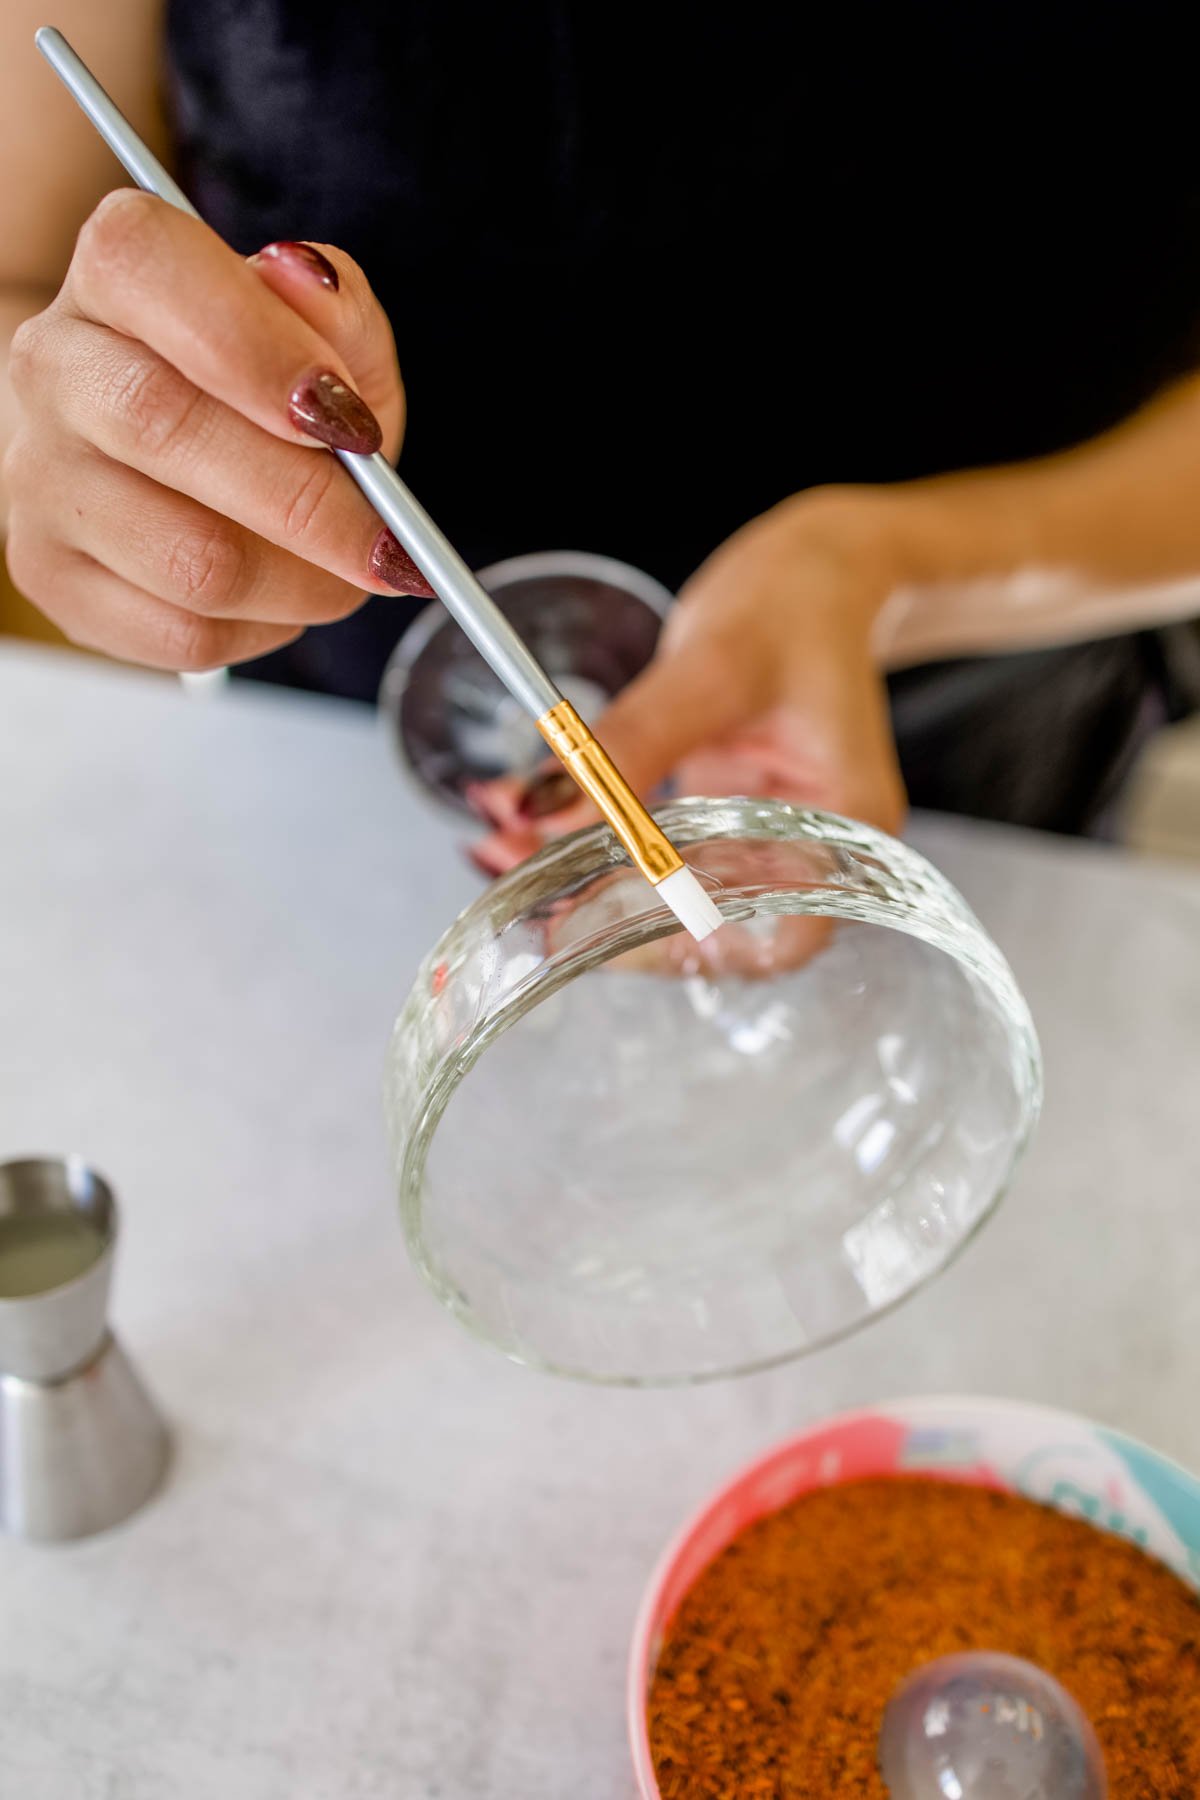 A woman moistening a portion of the rim of a margarita glass using a thin brush.